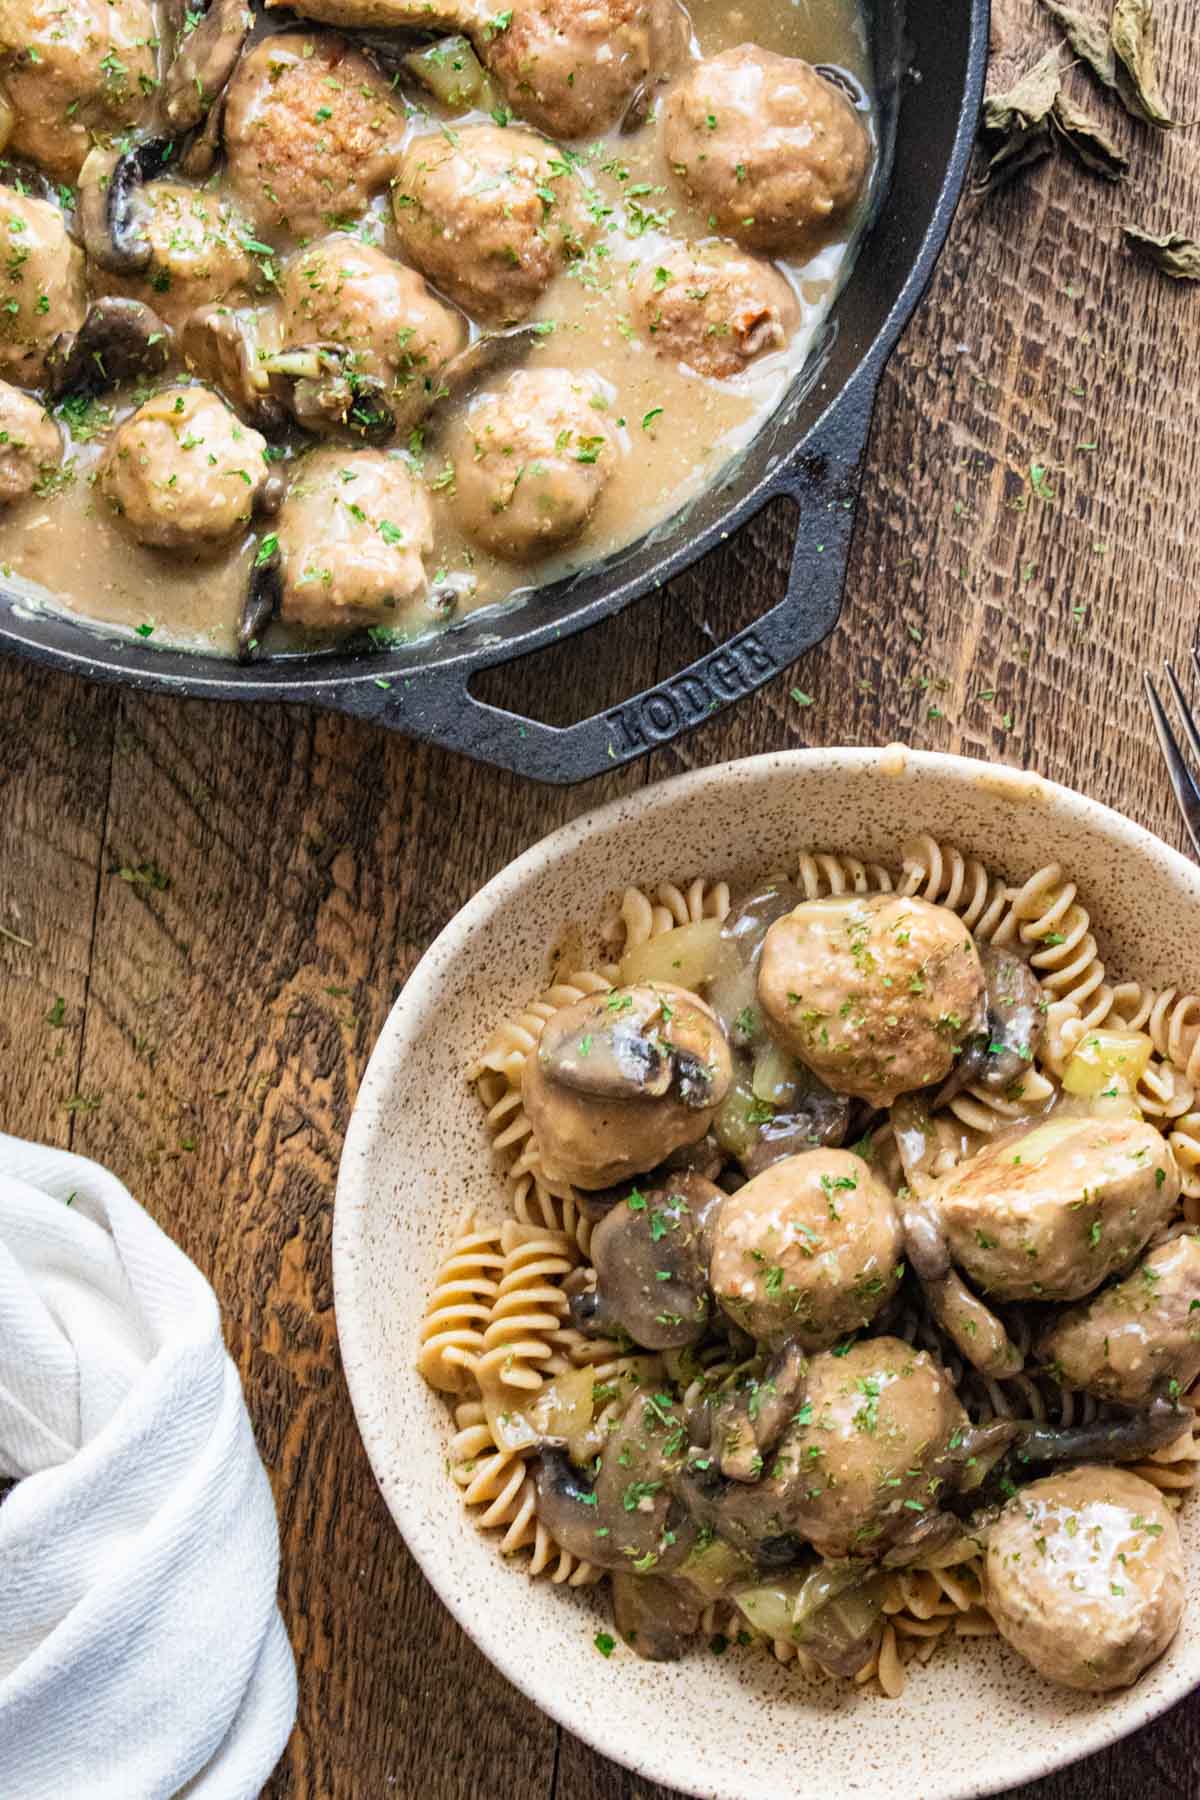 Swedish meatball stroganoff in a cast iron skillet with a bowl of pasta and a creamy mushroom sauce